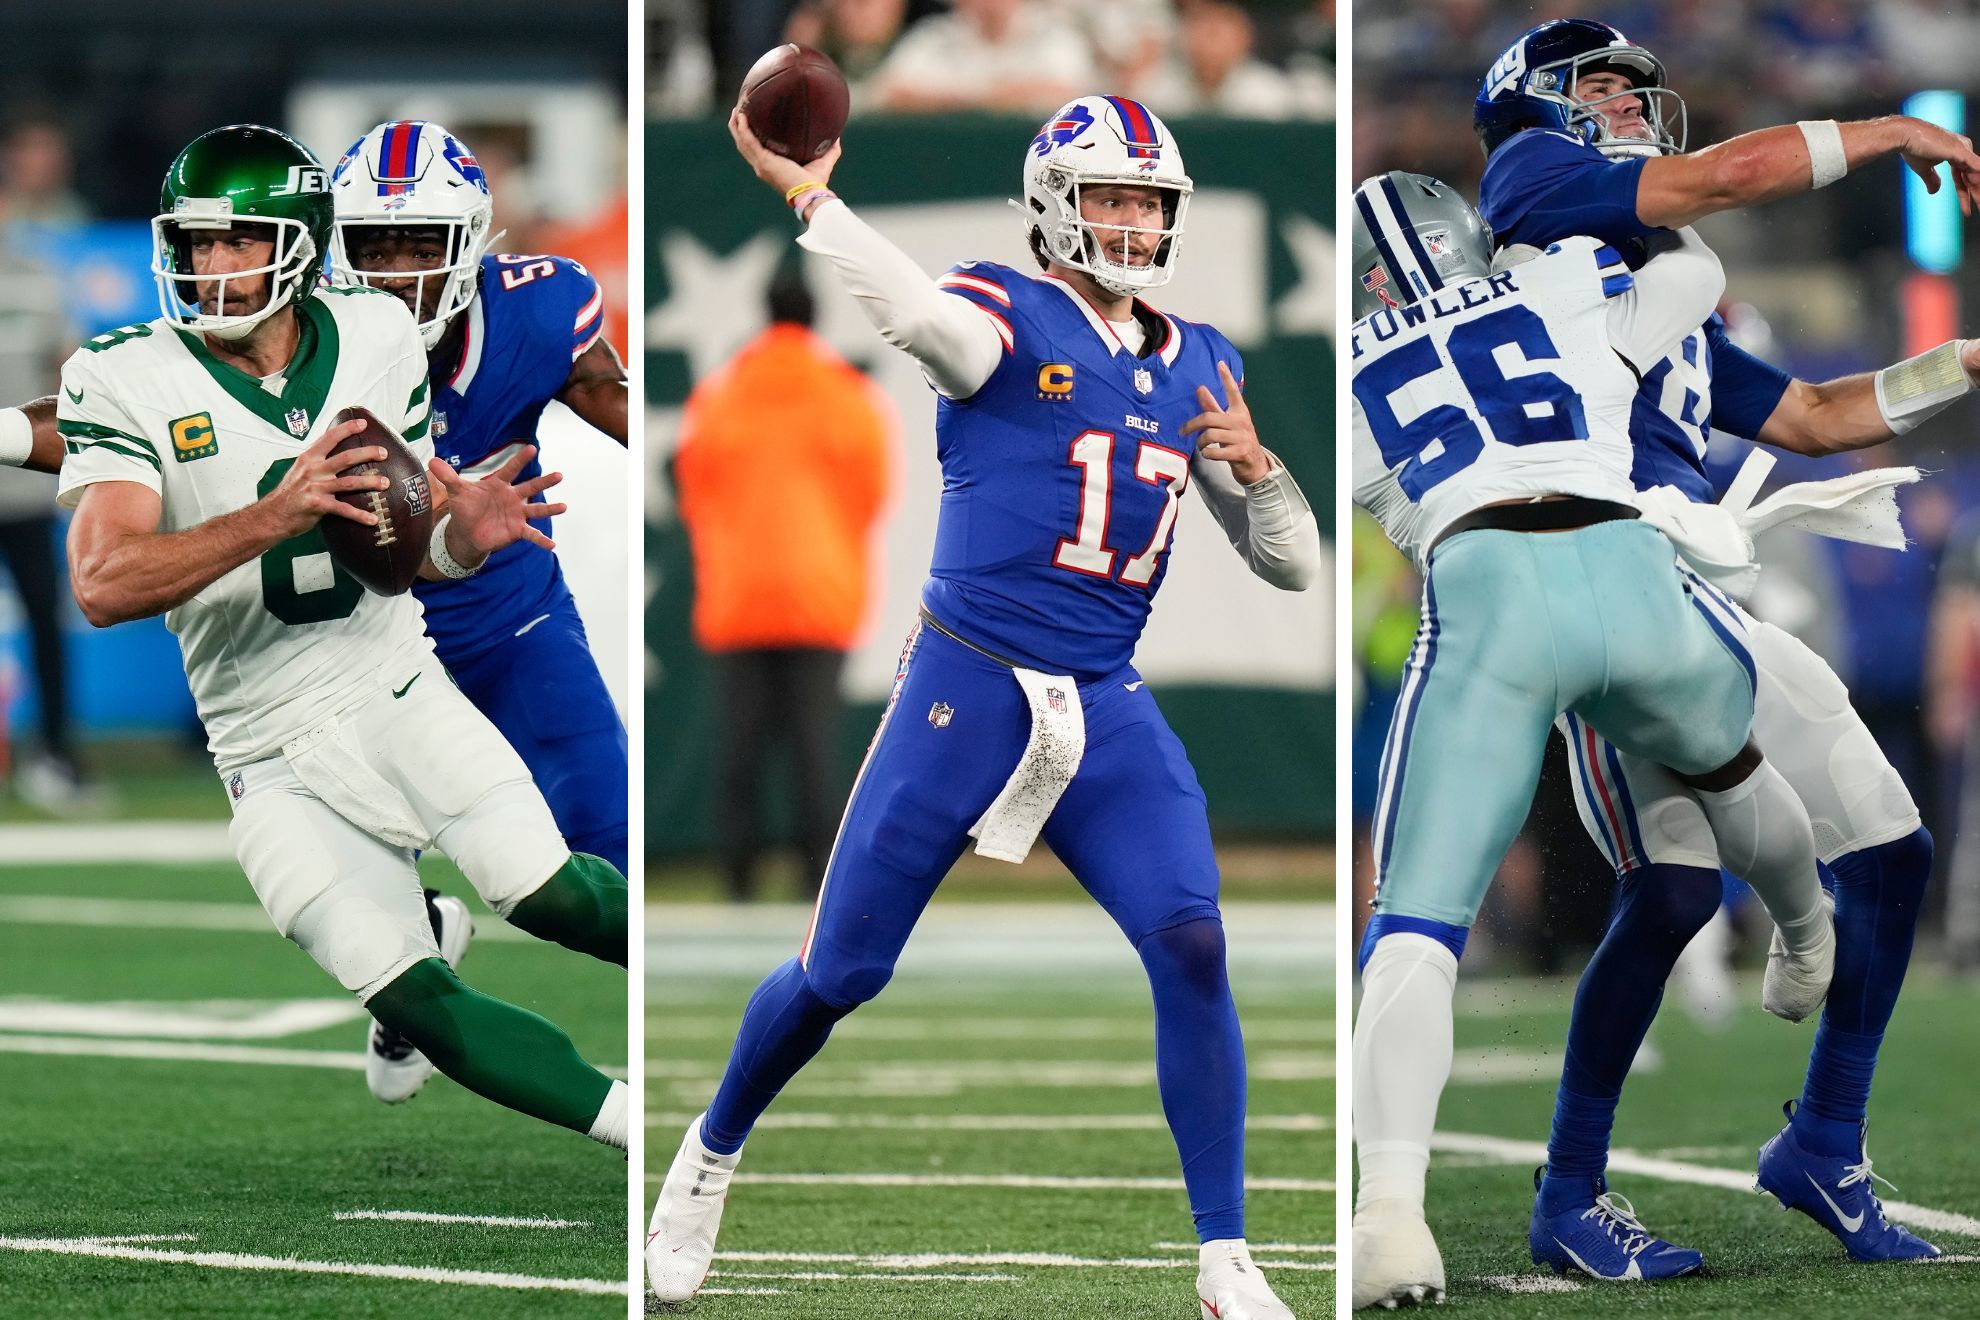 Aaron Rodgers, Josh Allen and Daniel Jones churn out worst NFL week in NY history